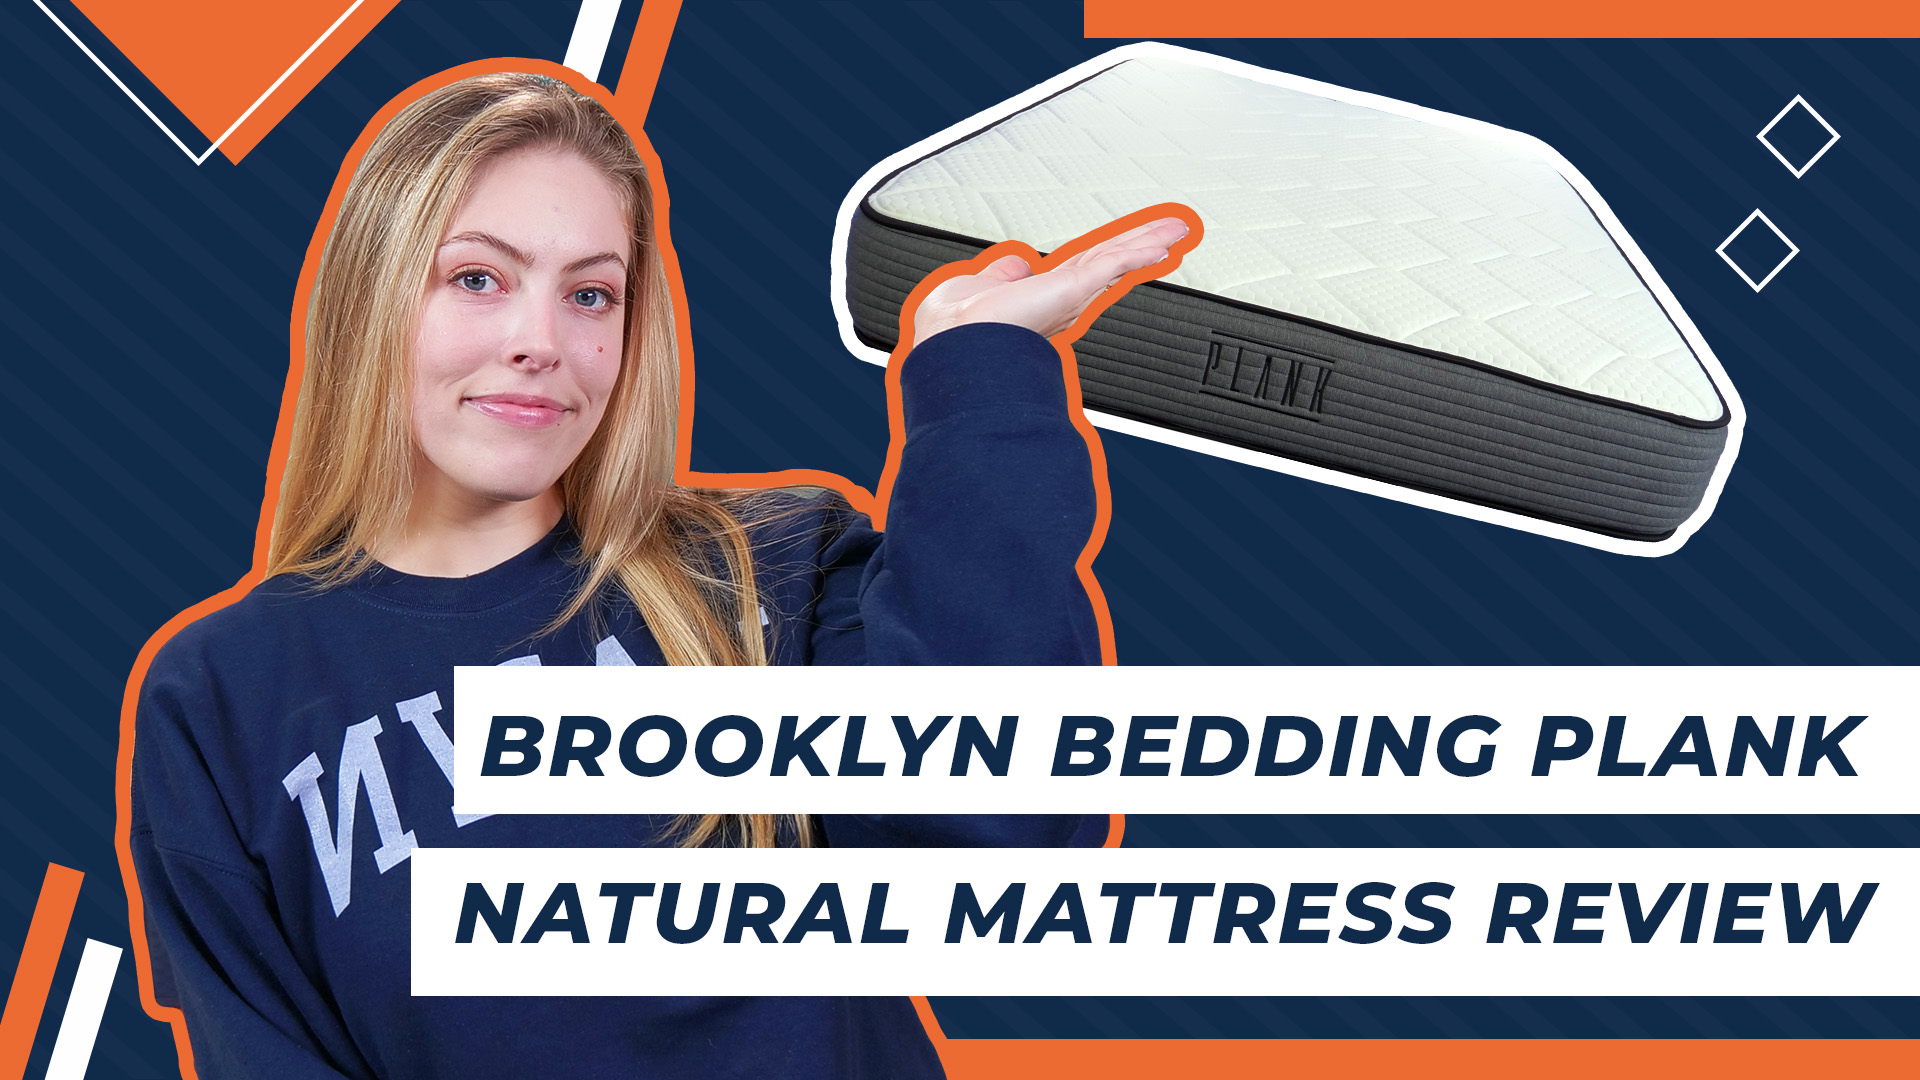 My Plank Firm Natural Mattress Review for 2023